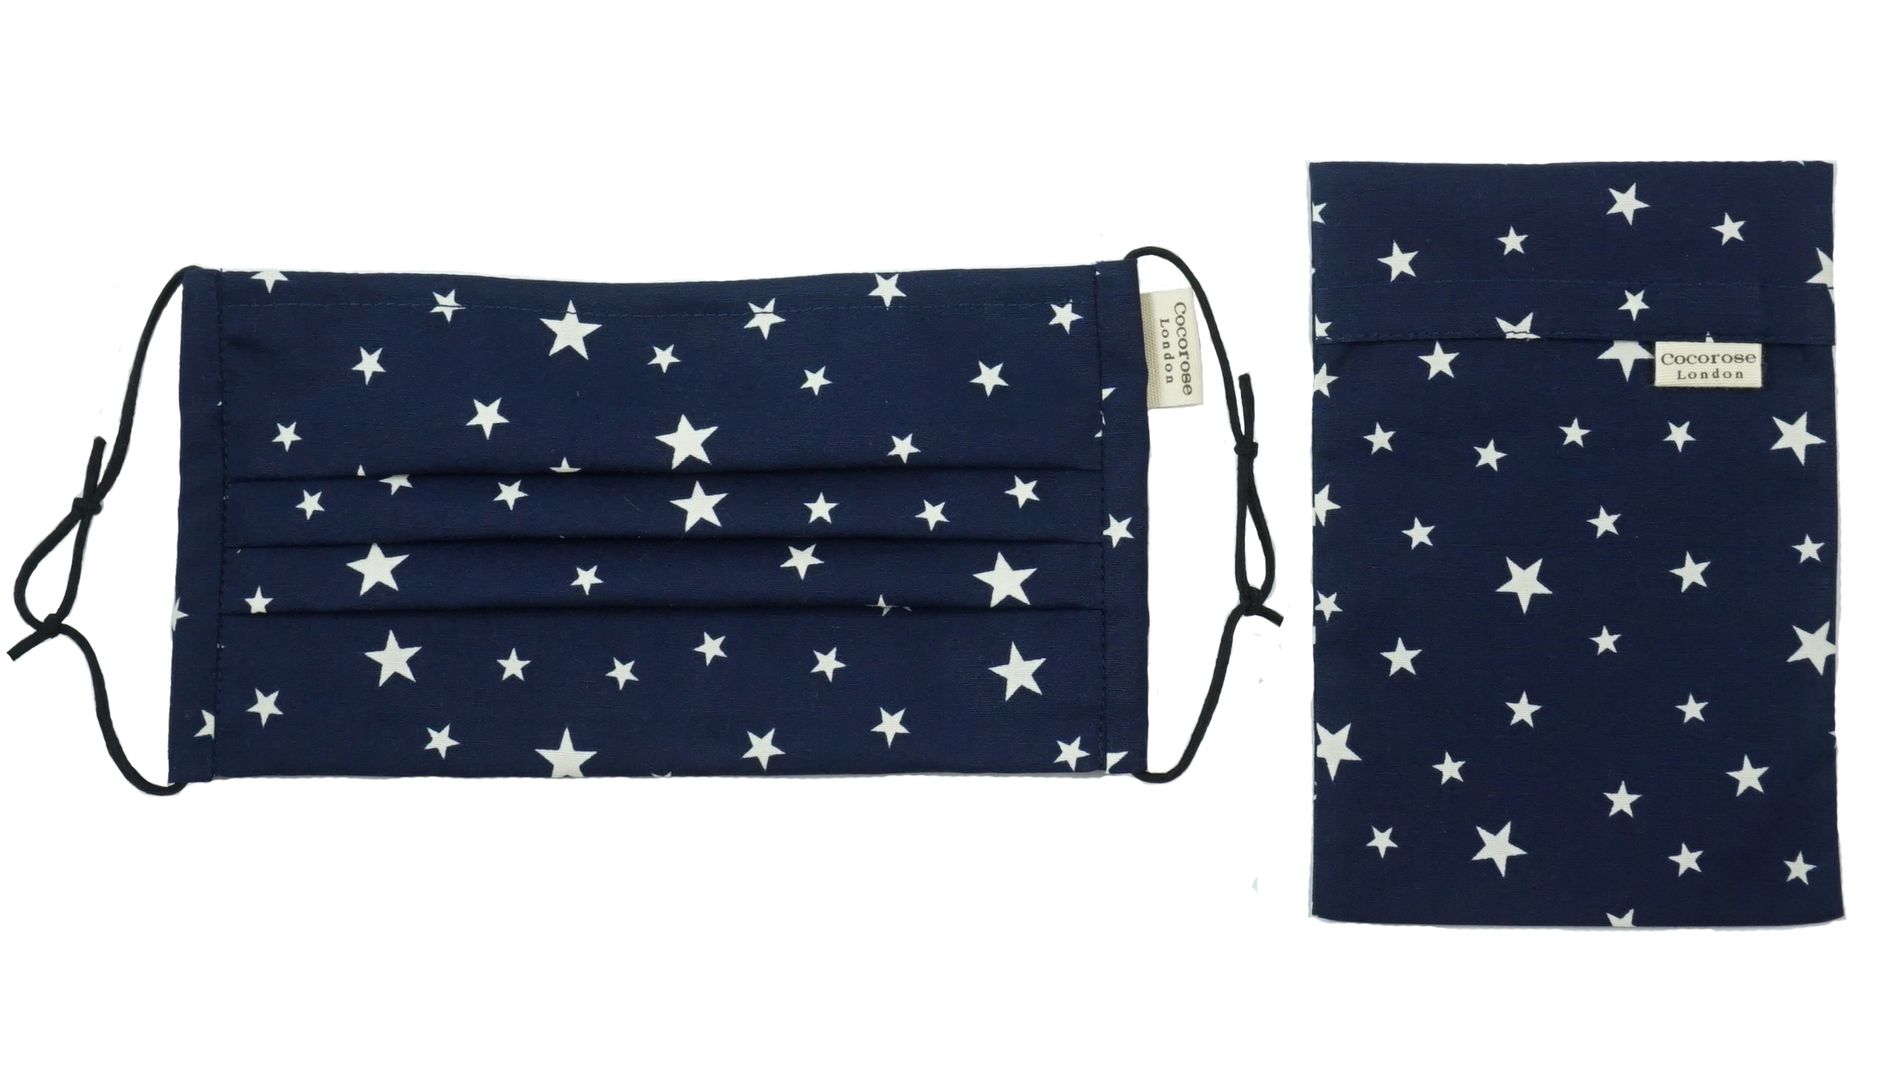 Navy with Stars cotton pleated face mask from Cocorose London